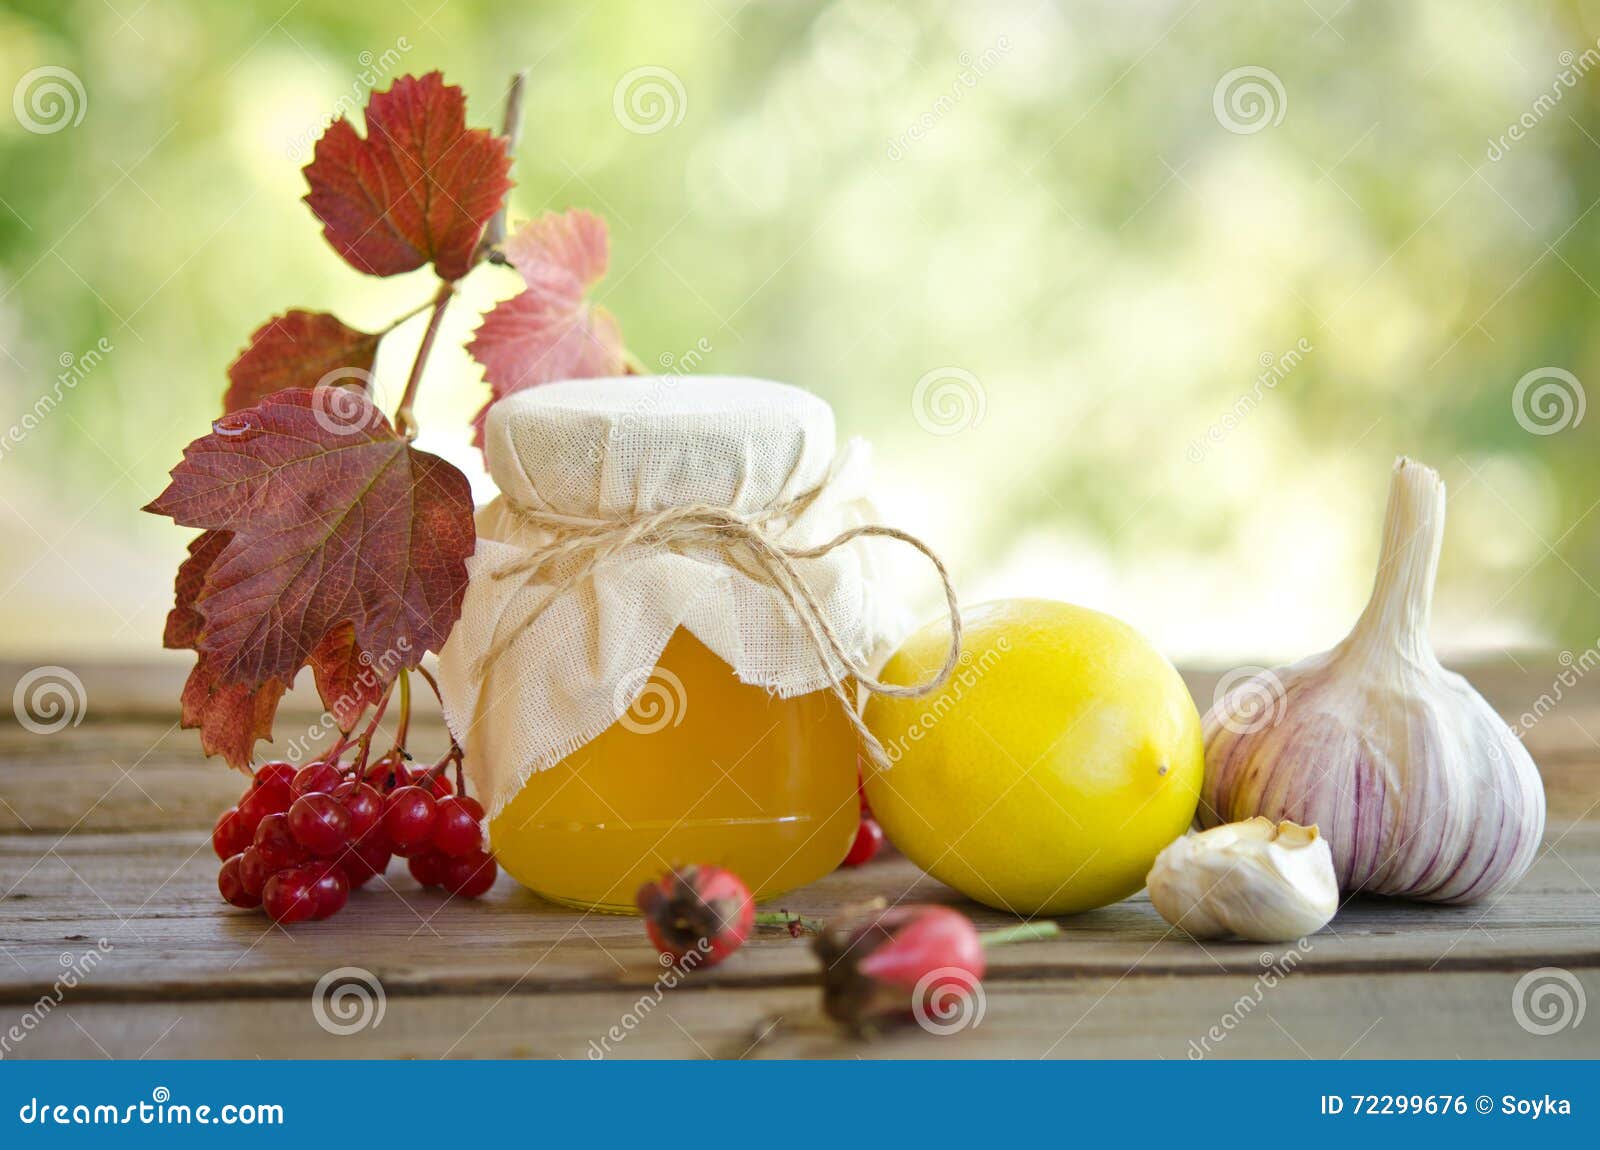 honey and others natural medicine for winter flue